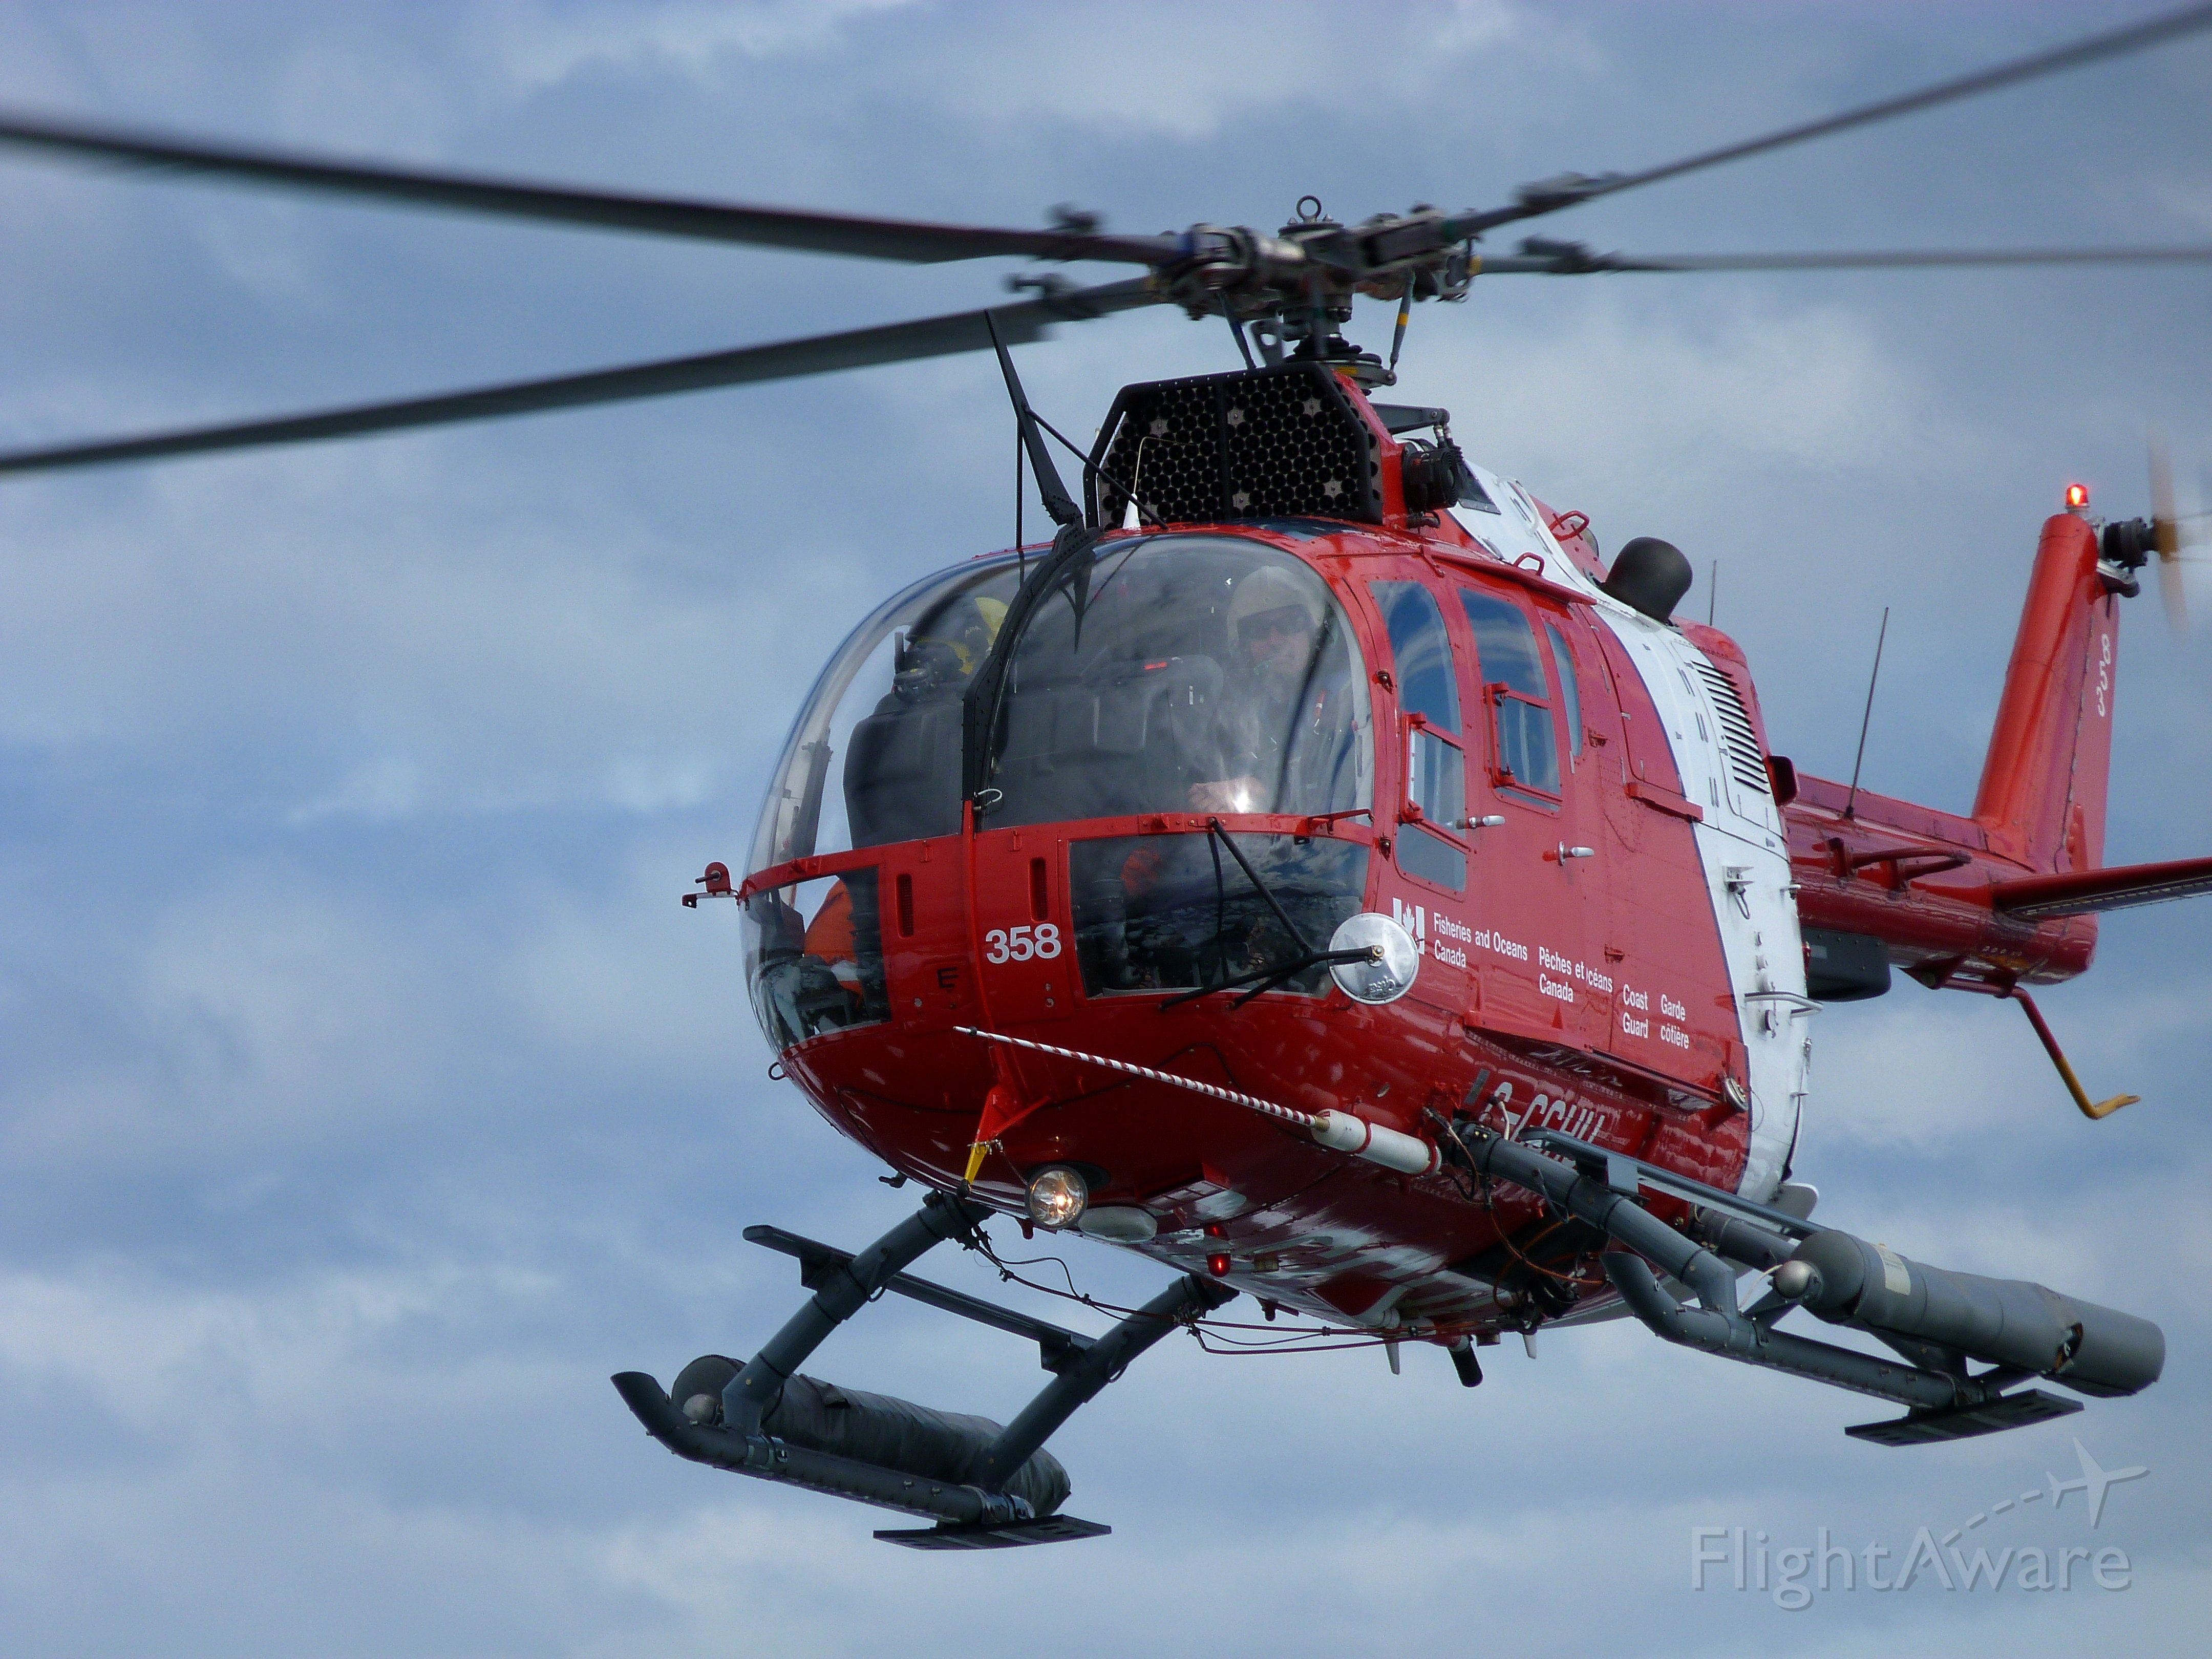 PADC BO-105 (C-GCHU) - Canadian Coast Guard/Fisheries & Oceans helicopter #358, C-GCHUbr /A Messerschmitt-Bolkow-Blohm Bo 105